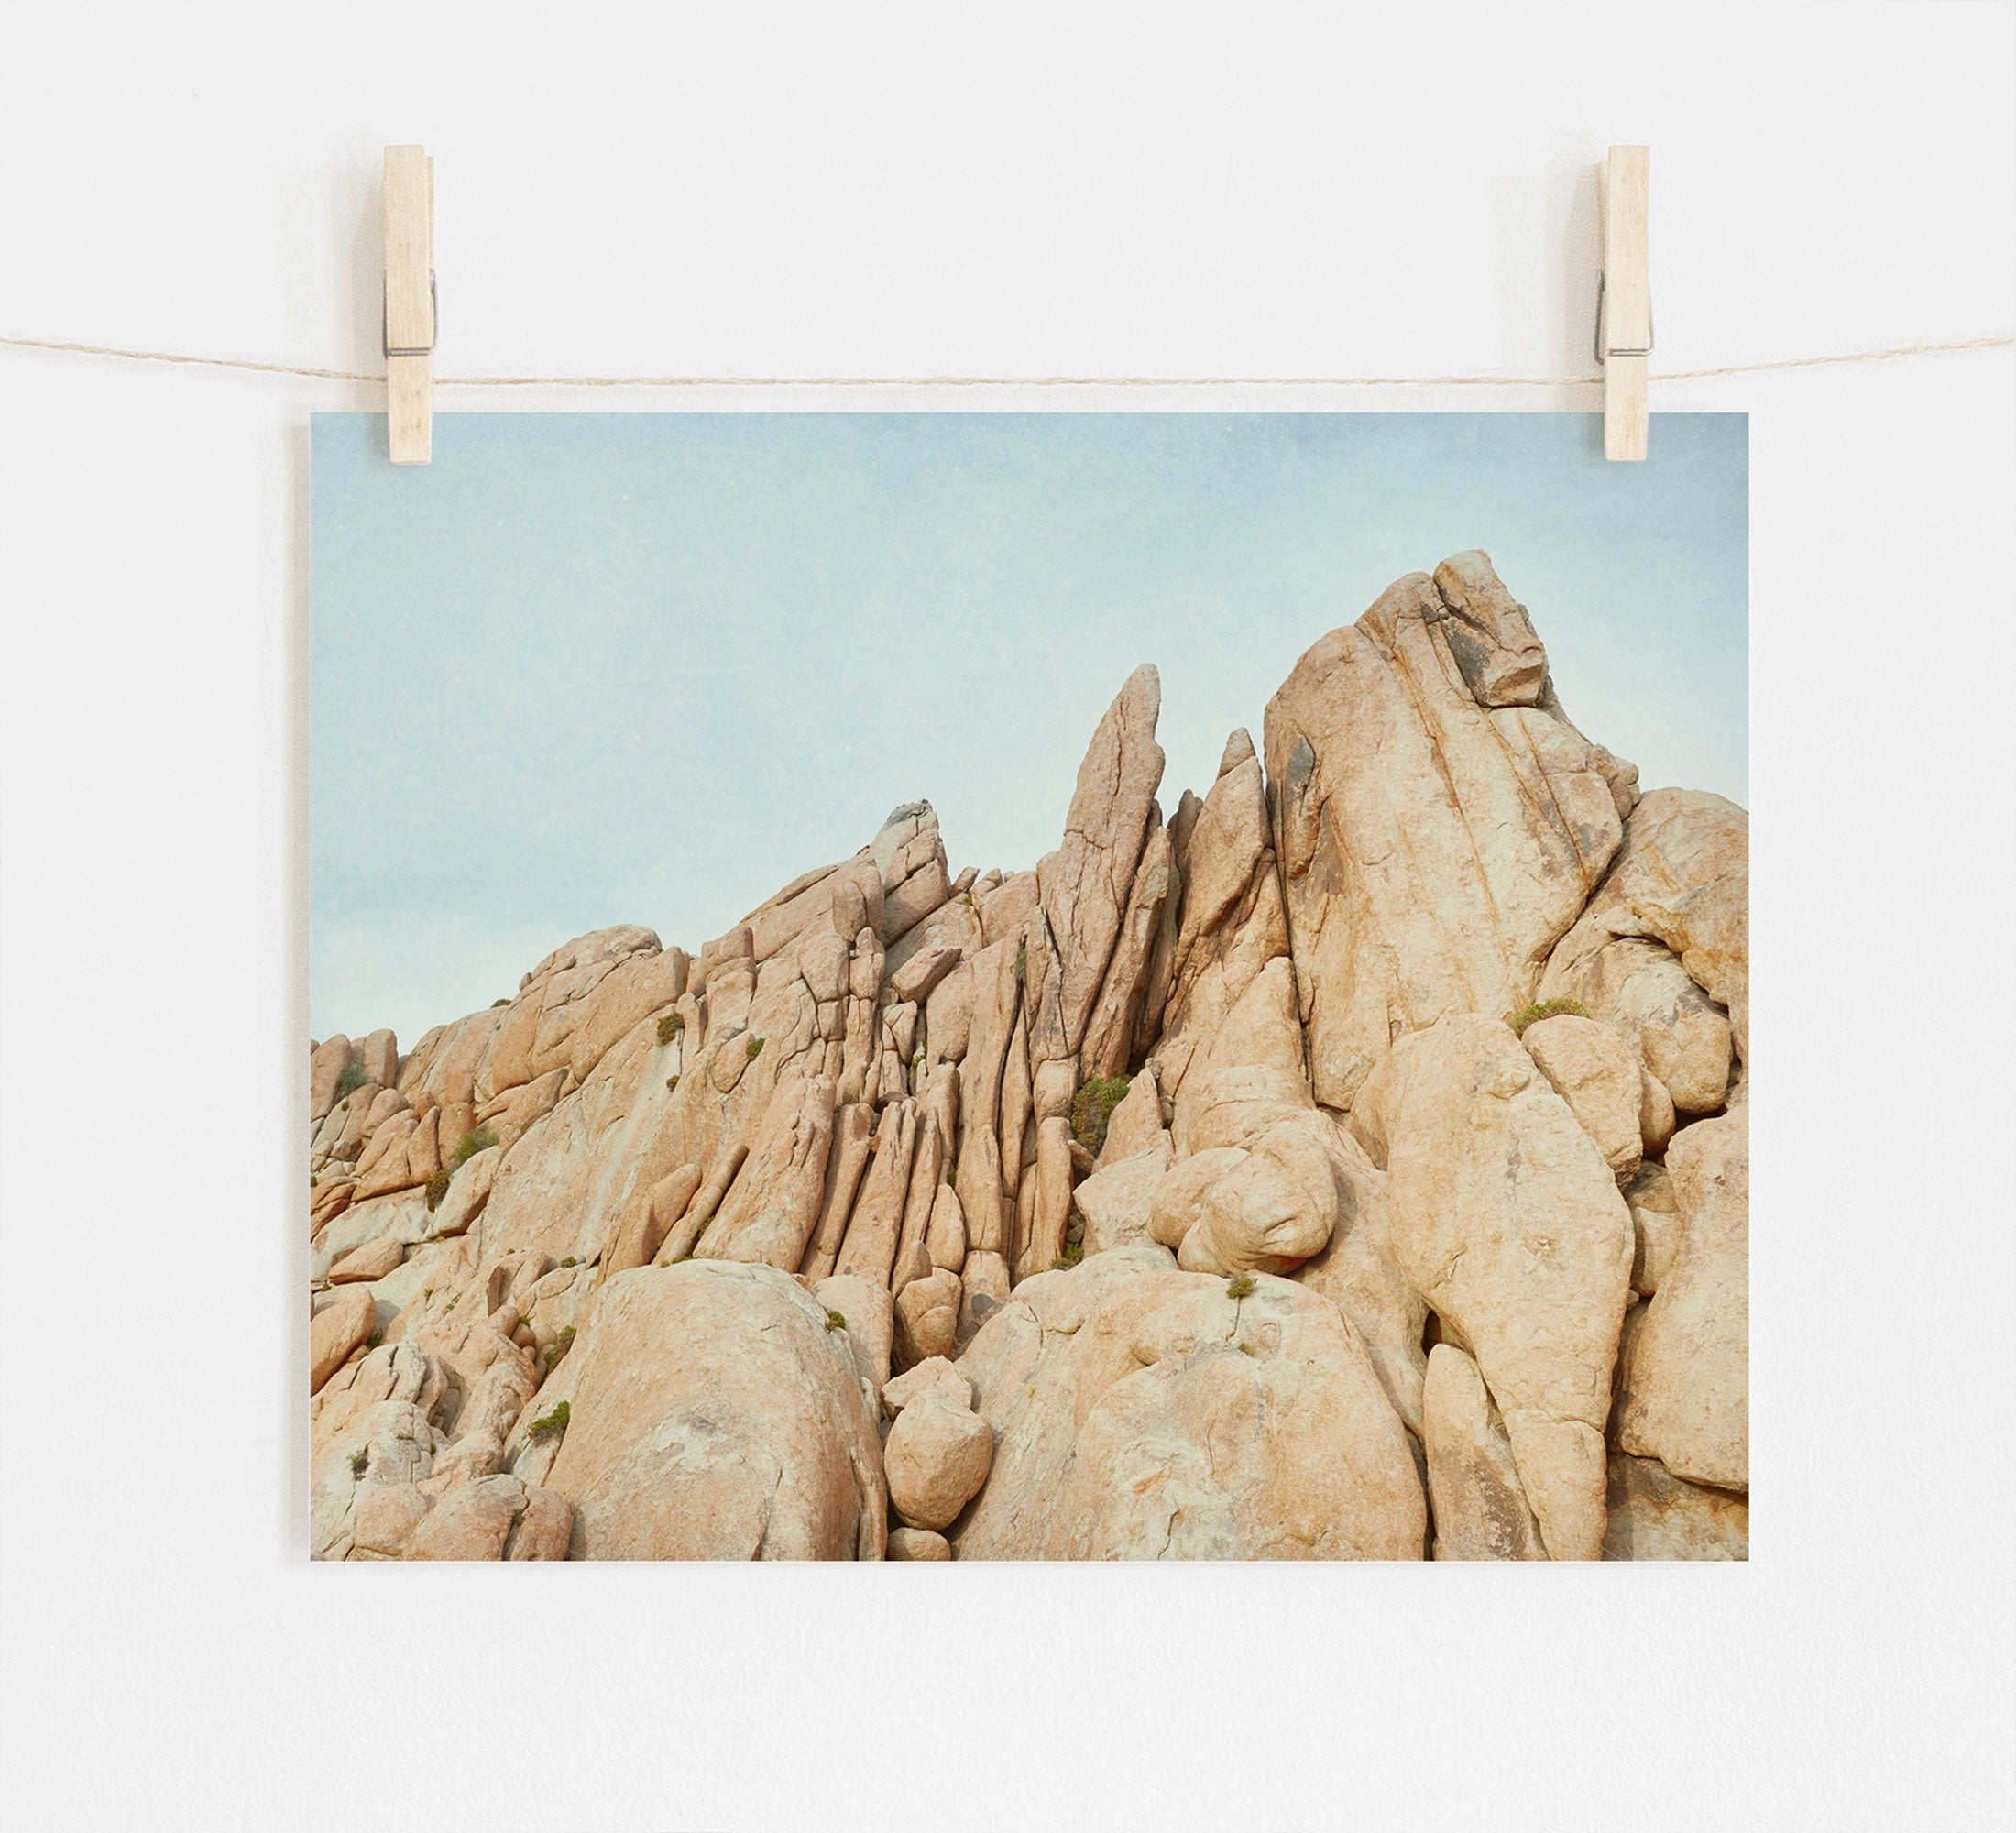 A photo of rugged, rocky cliffs with pointed formations, displayed hanging from two wooden clothespins on a string against a white wall, printed on archival photographic paper. 

Replace with: Offley Green's Joshua Tree Print, 'Joshua Rocks'